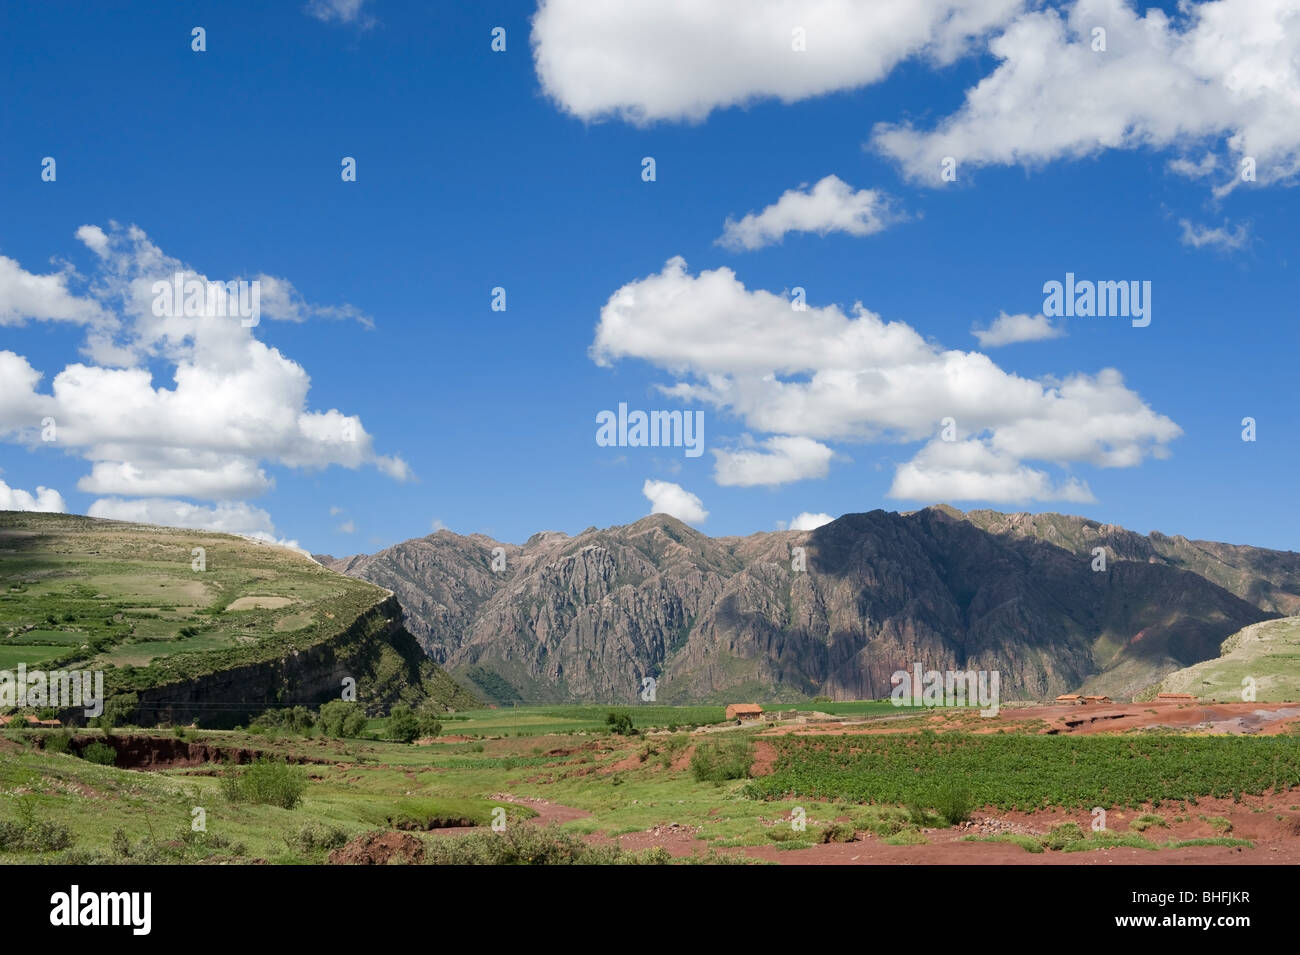 Andean landscape, countryside of Bolivia. Stock Photo